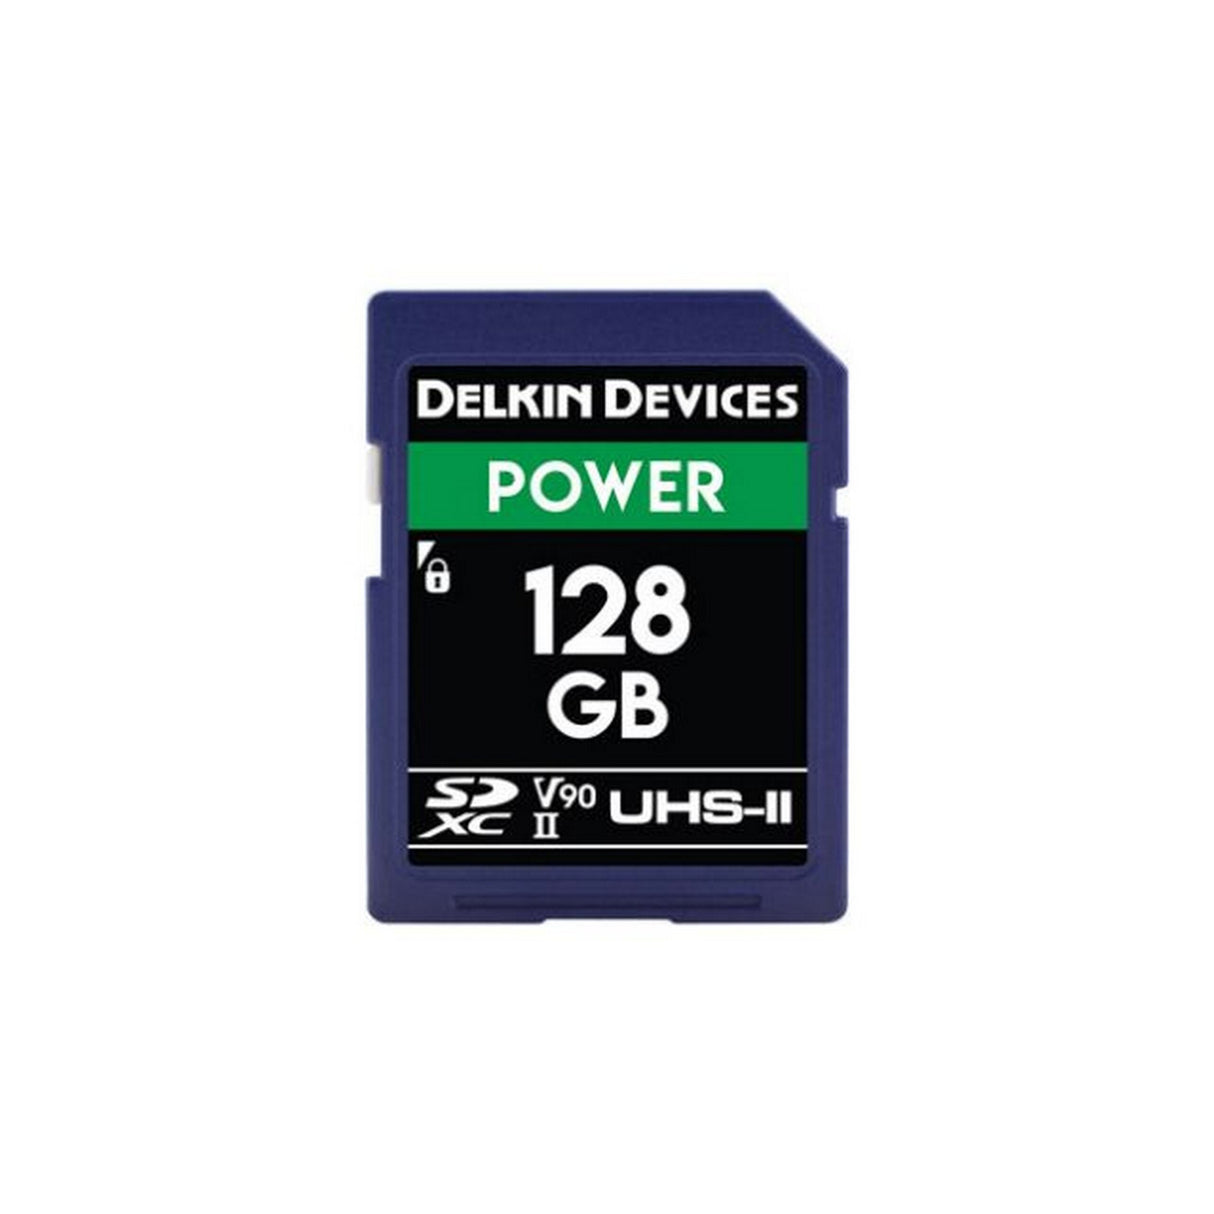 Delkin Devices Power UHS-II U3/V90 SD Memory Card, 128GB